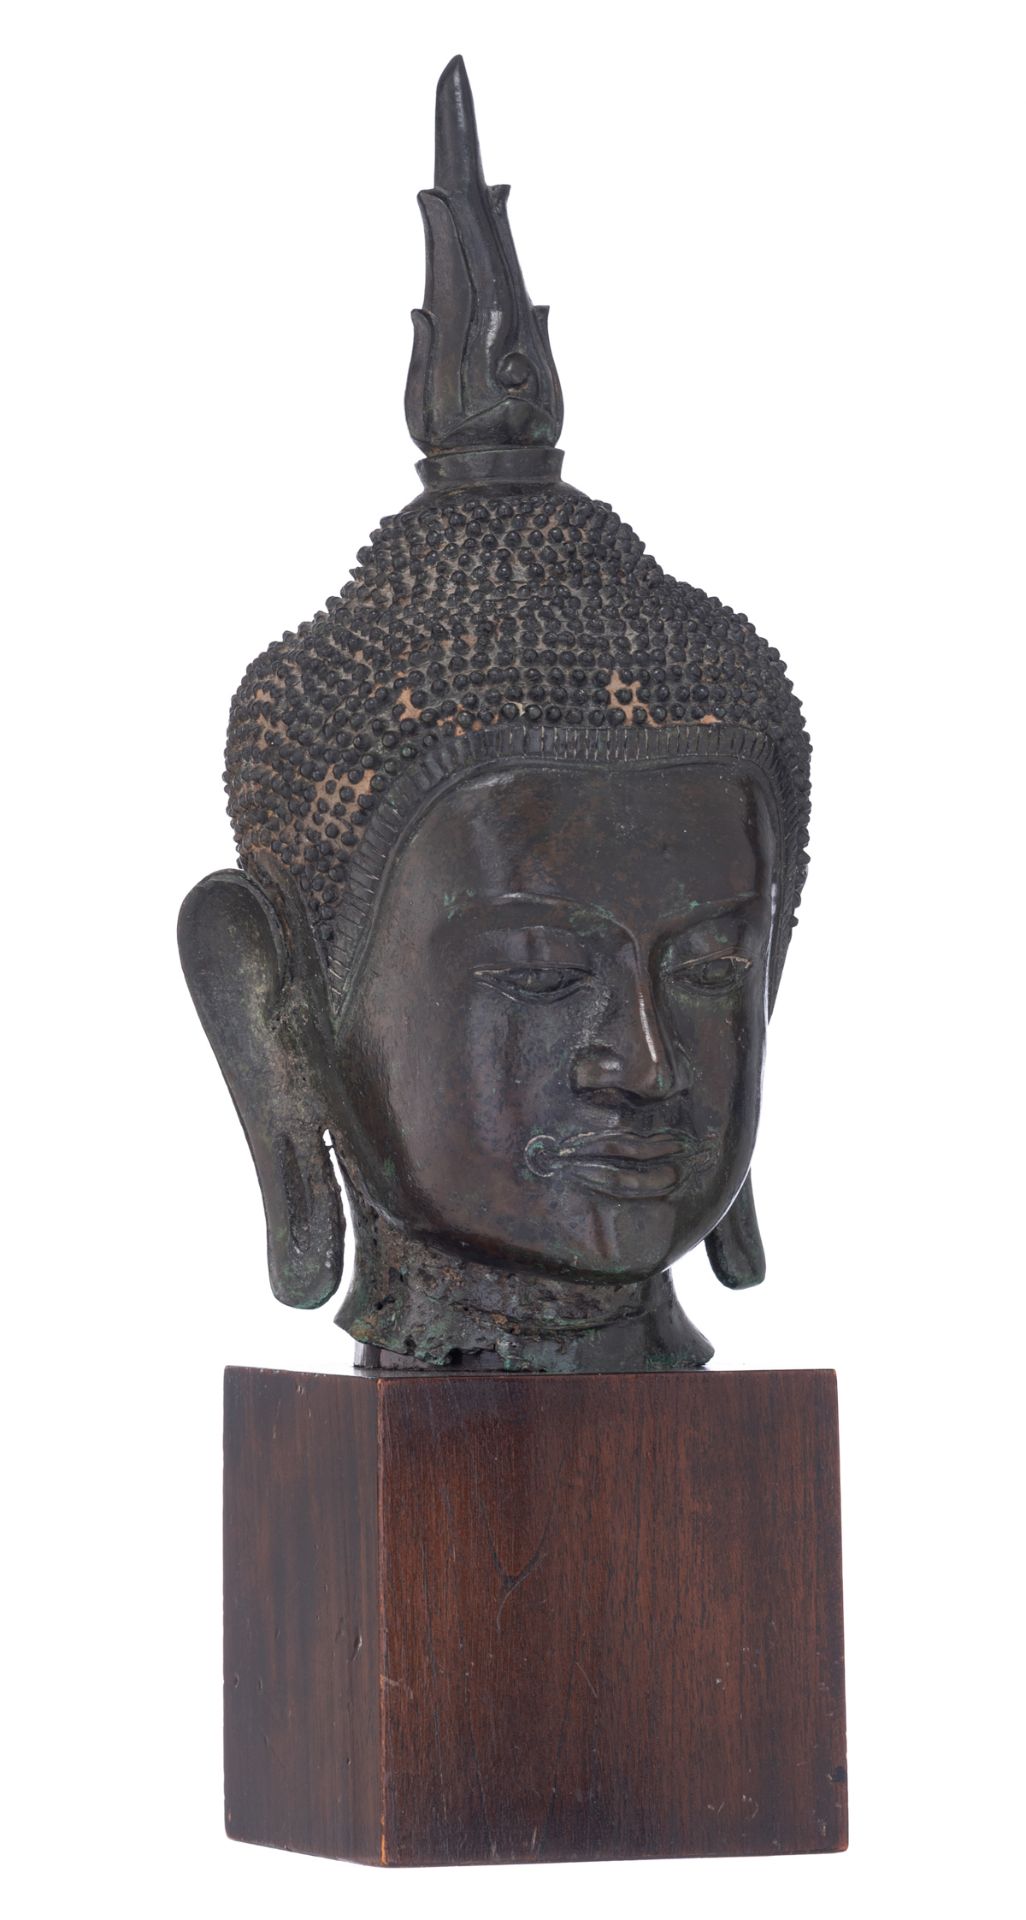 An Oriental bronze group, depicting the head of the Buddha, on a wooden base, H 40,5 cm